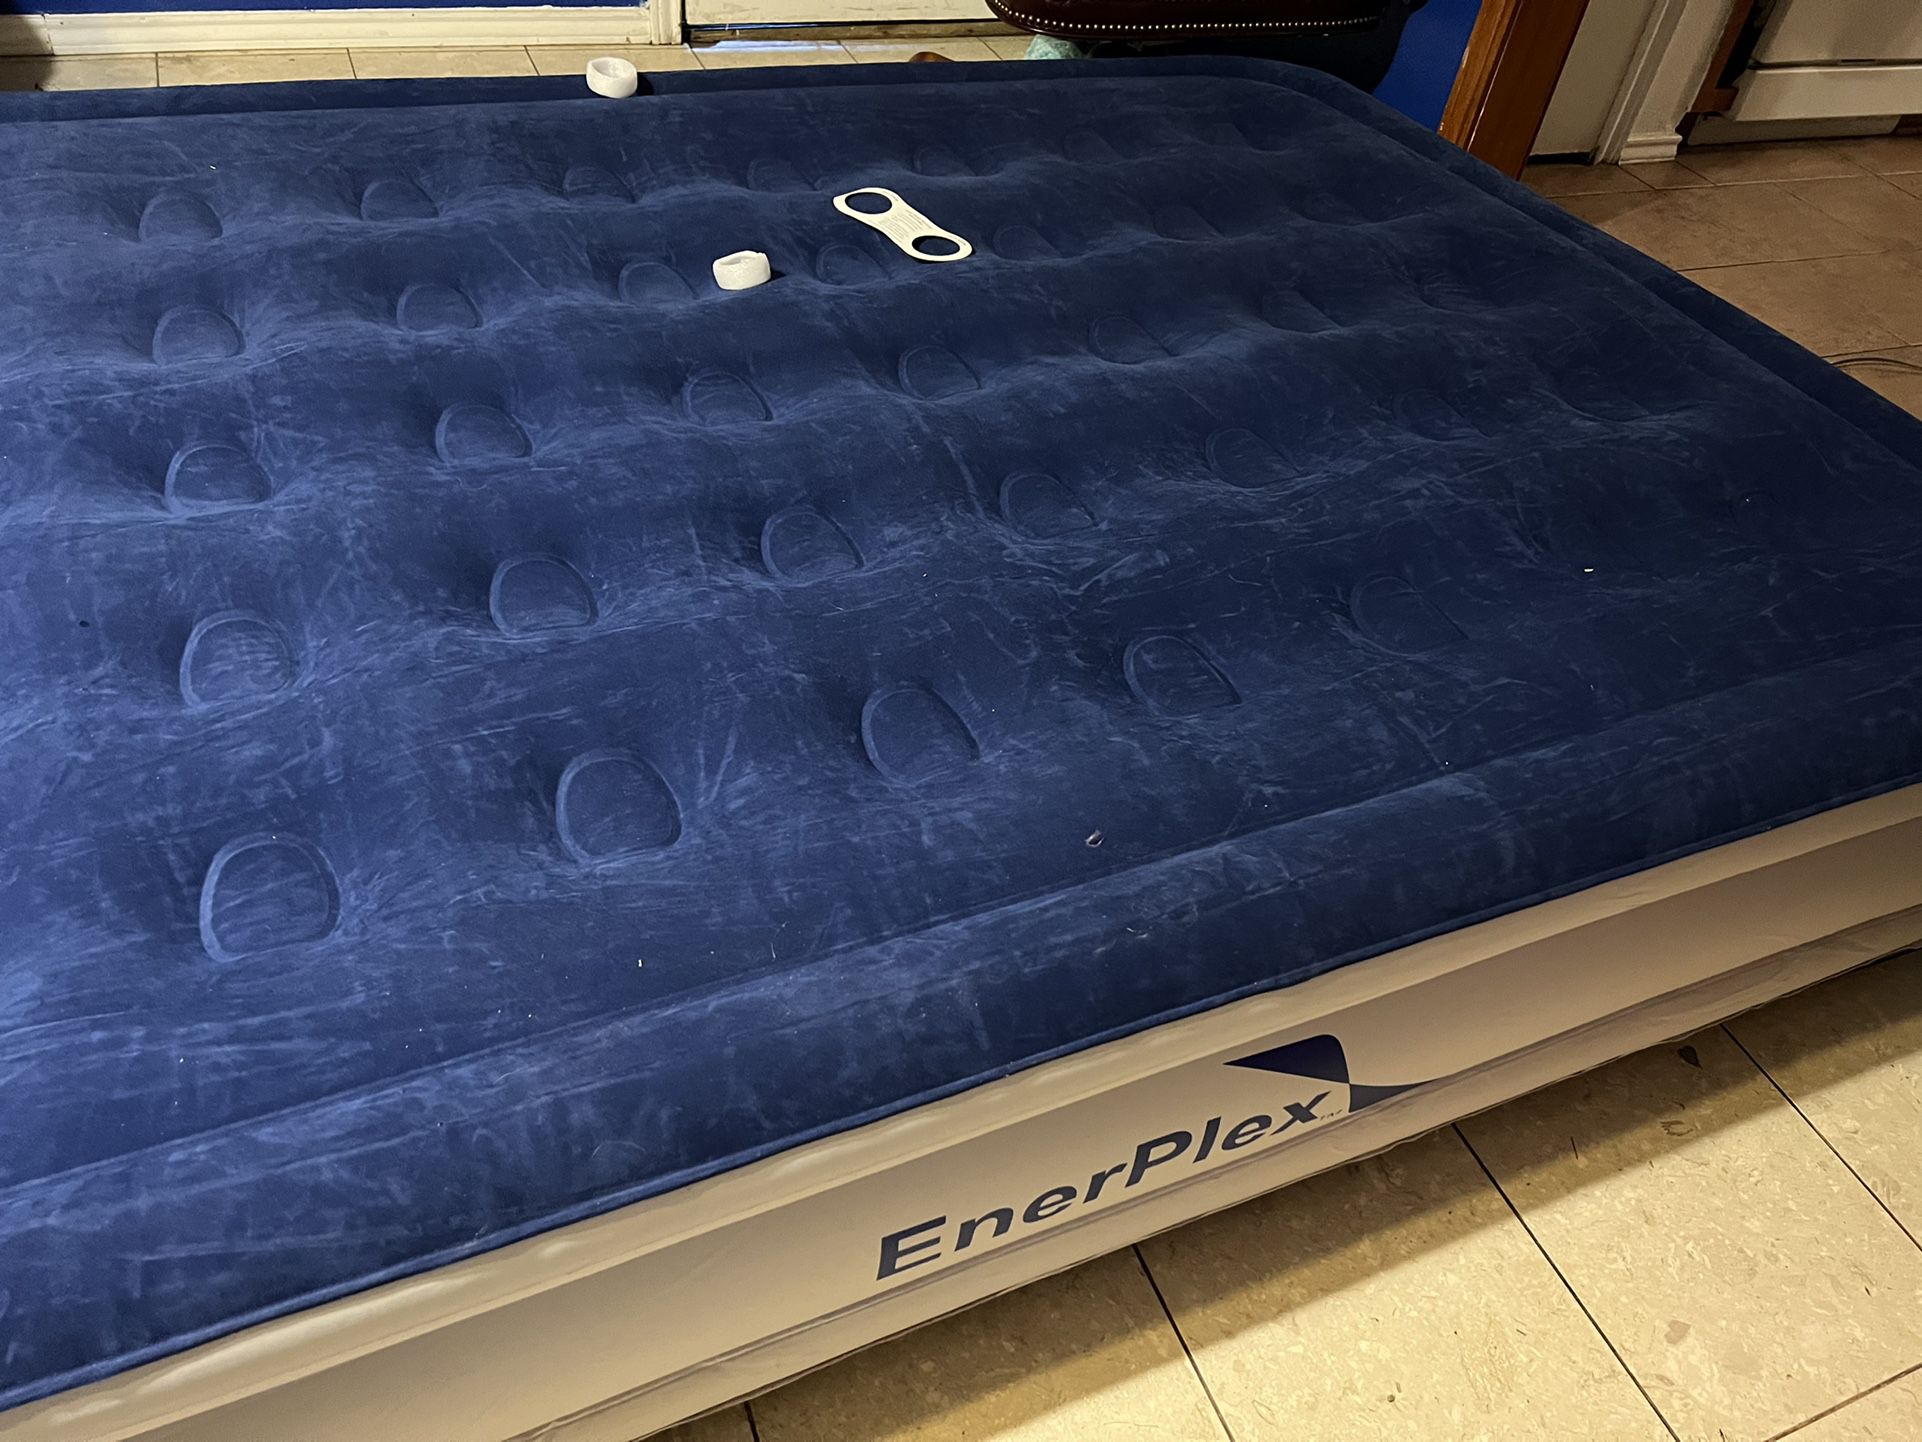 EnerPlex Air Mattress for Camping - Luxury 15" Inflatable Queen Mattress Bed w/ Built-in Dual Pump for Travel